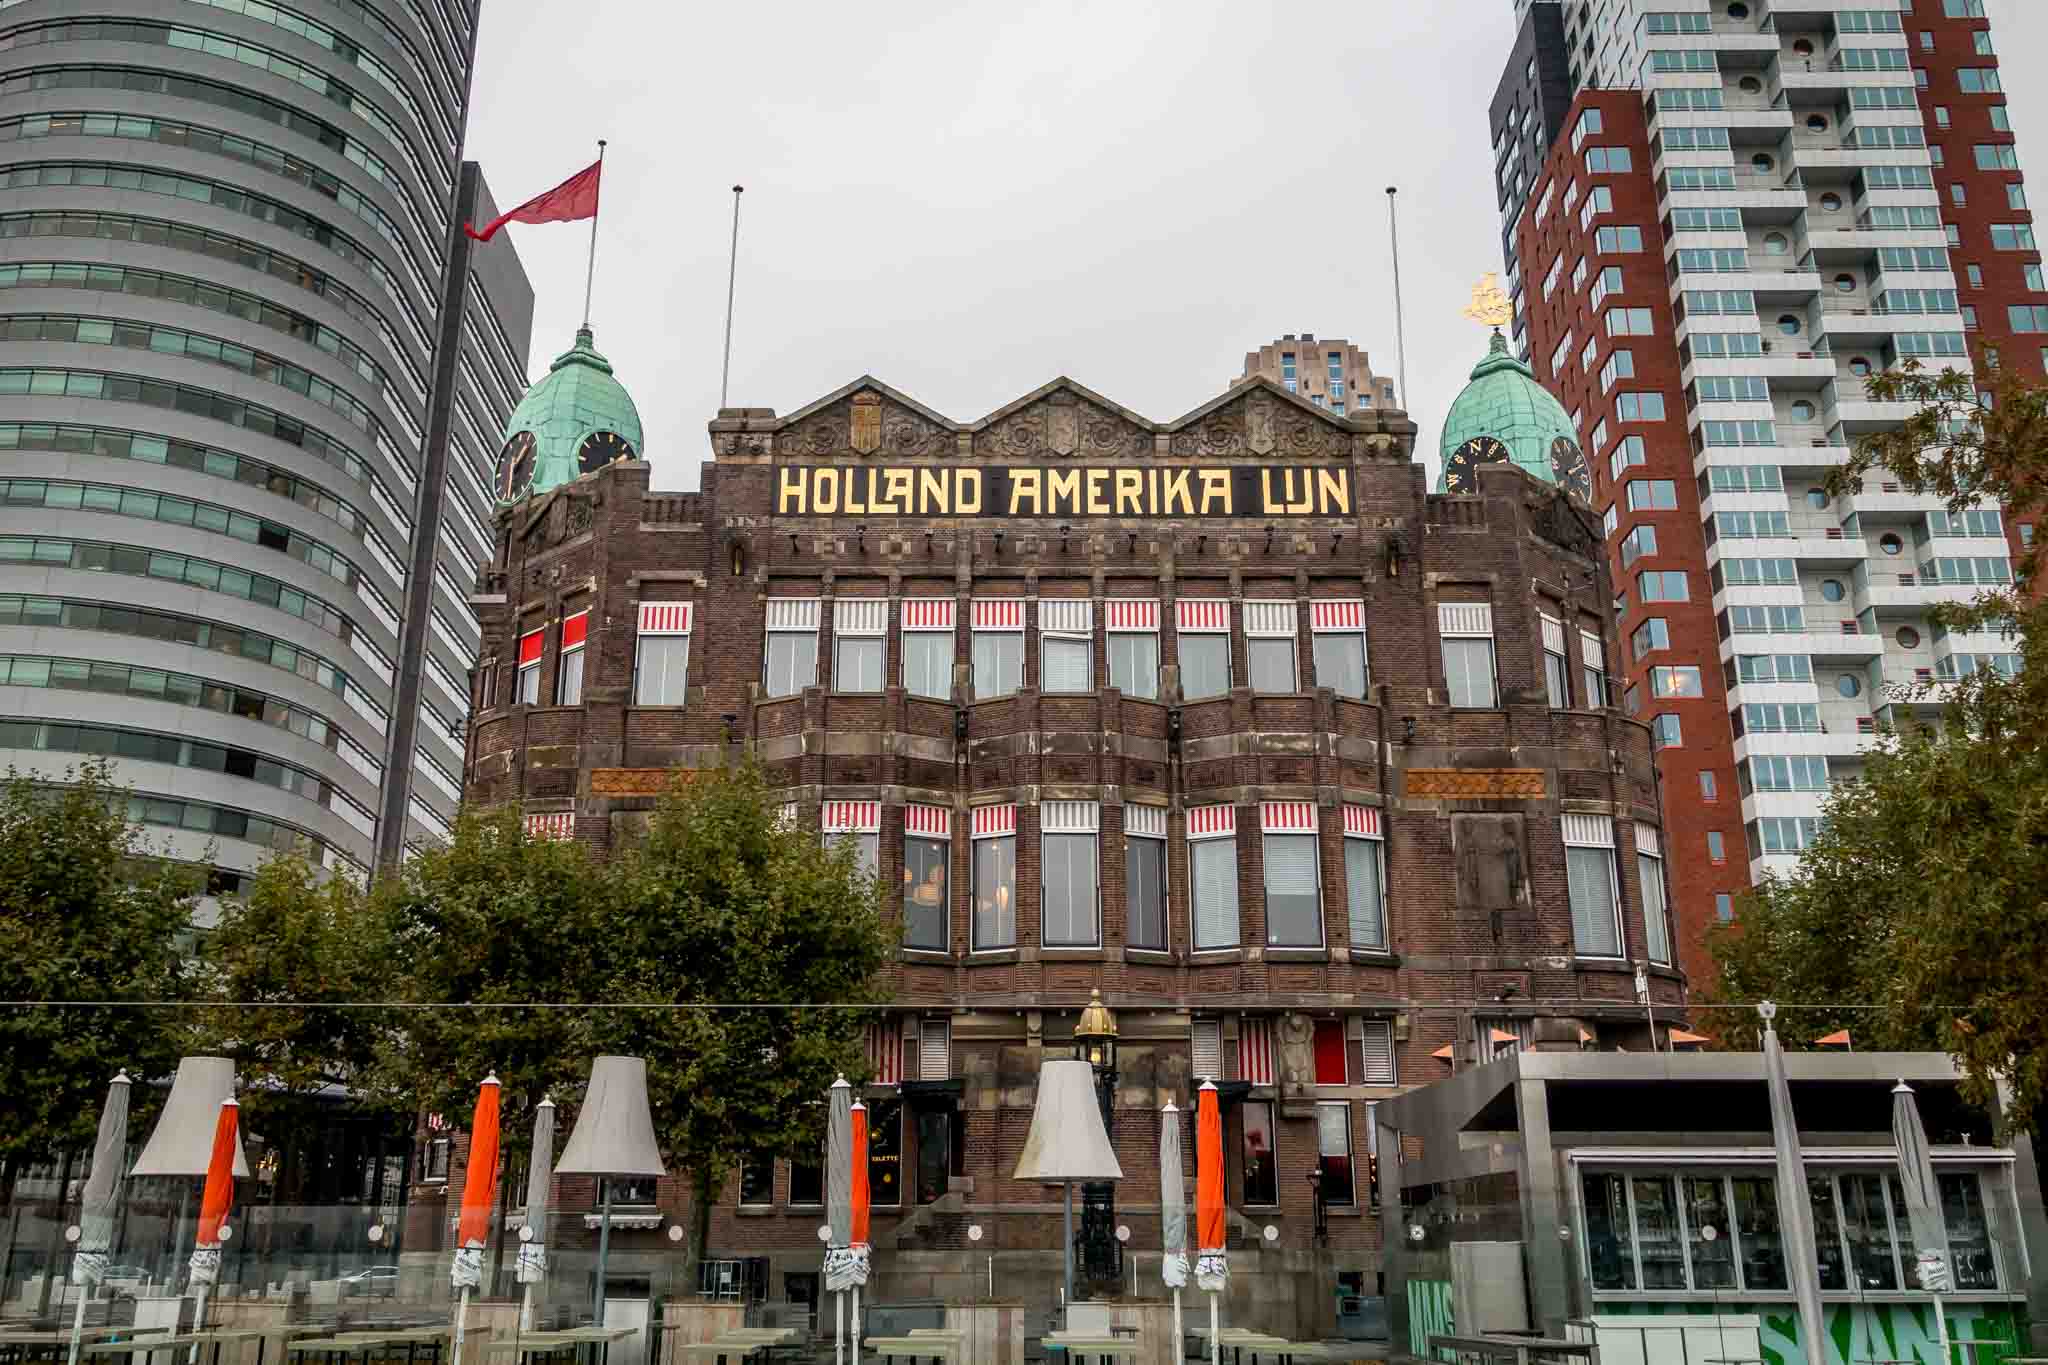 The original Holland America Lines headquarters is now the Hotel New York